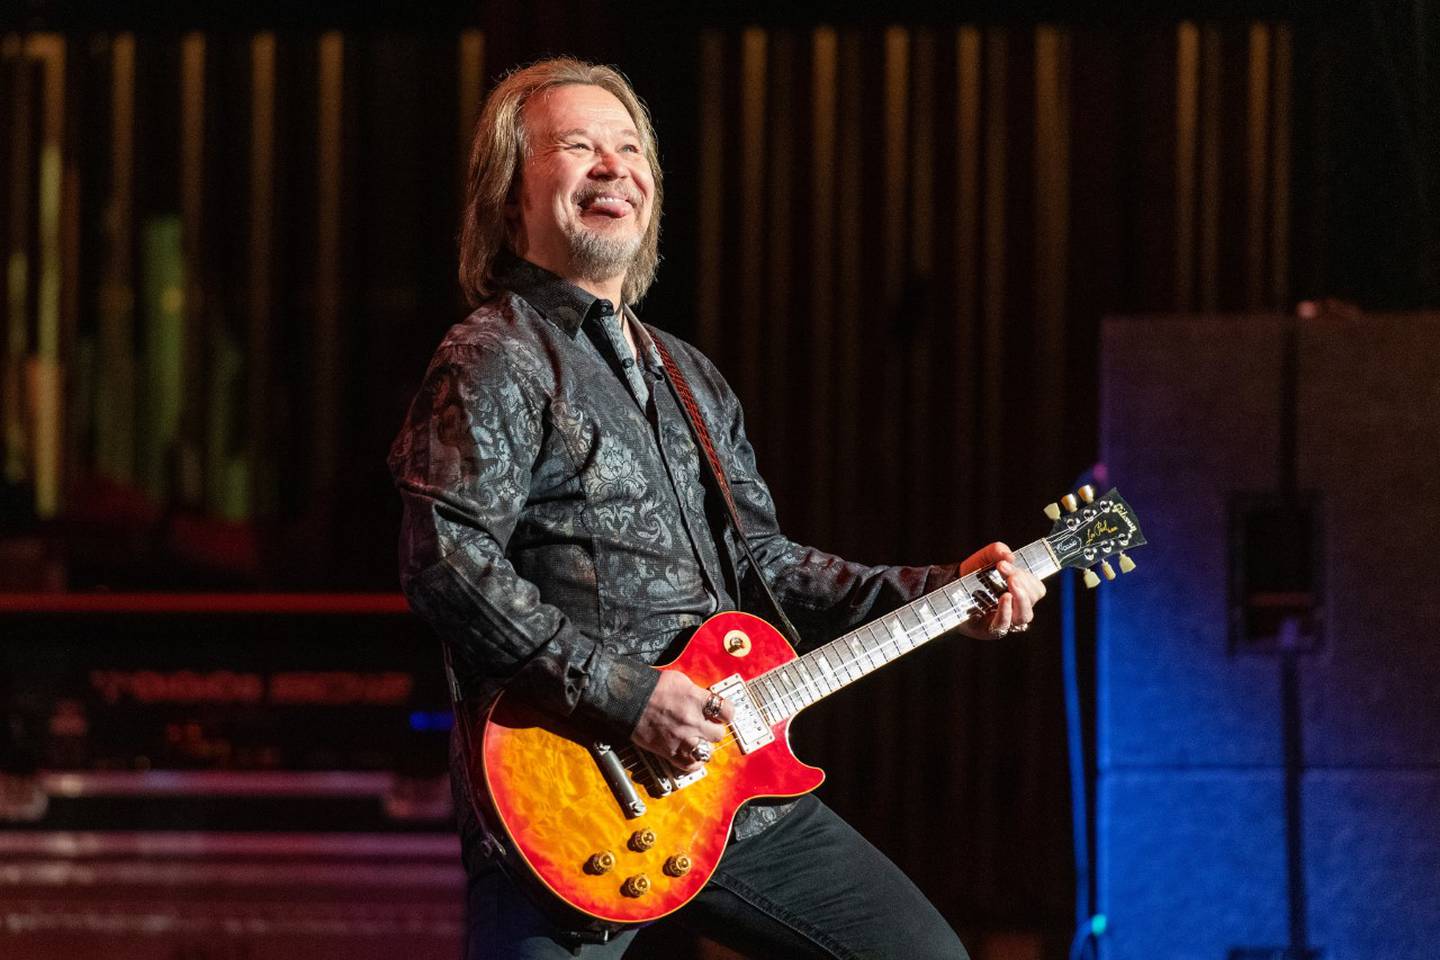 American country artist Travis Tritt will perform at the Rialto Square Theatre in Joliet on Aug, 10. Tickets are on sale now.